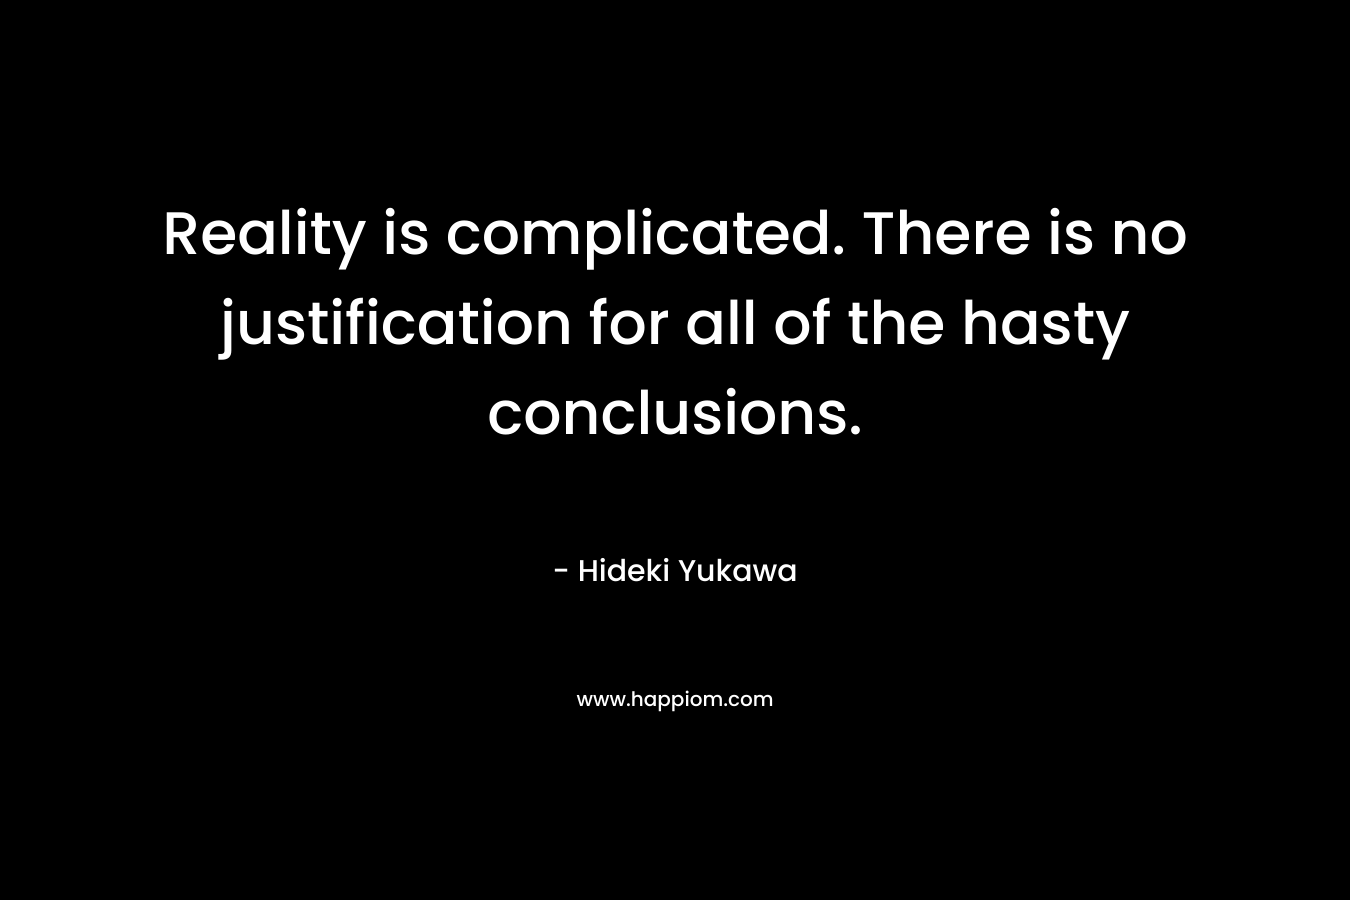 Reality is complicated. There is no justification for all of the hasty conclusions.